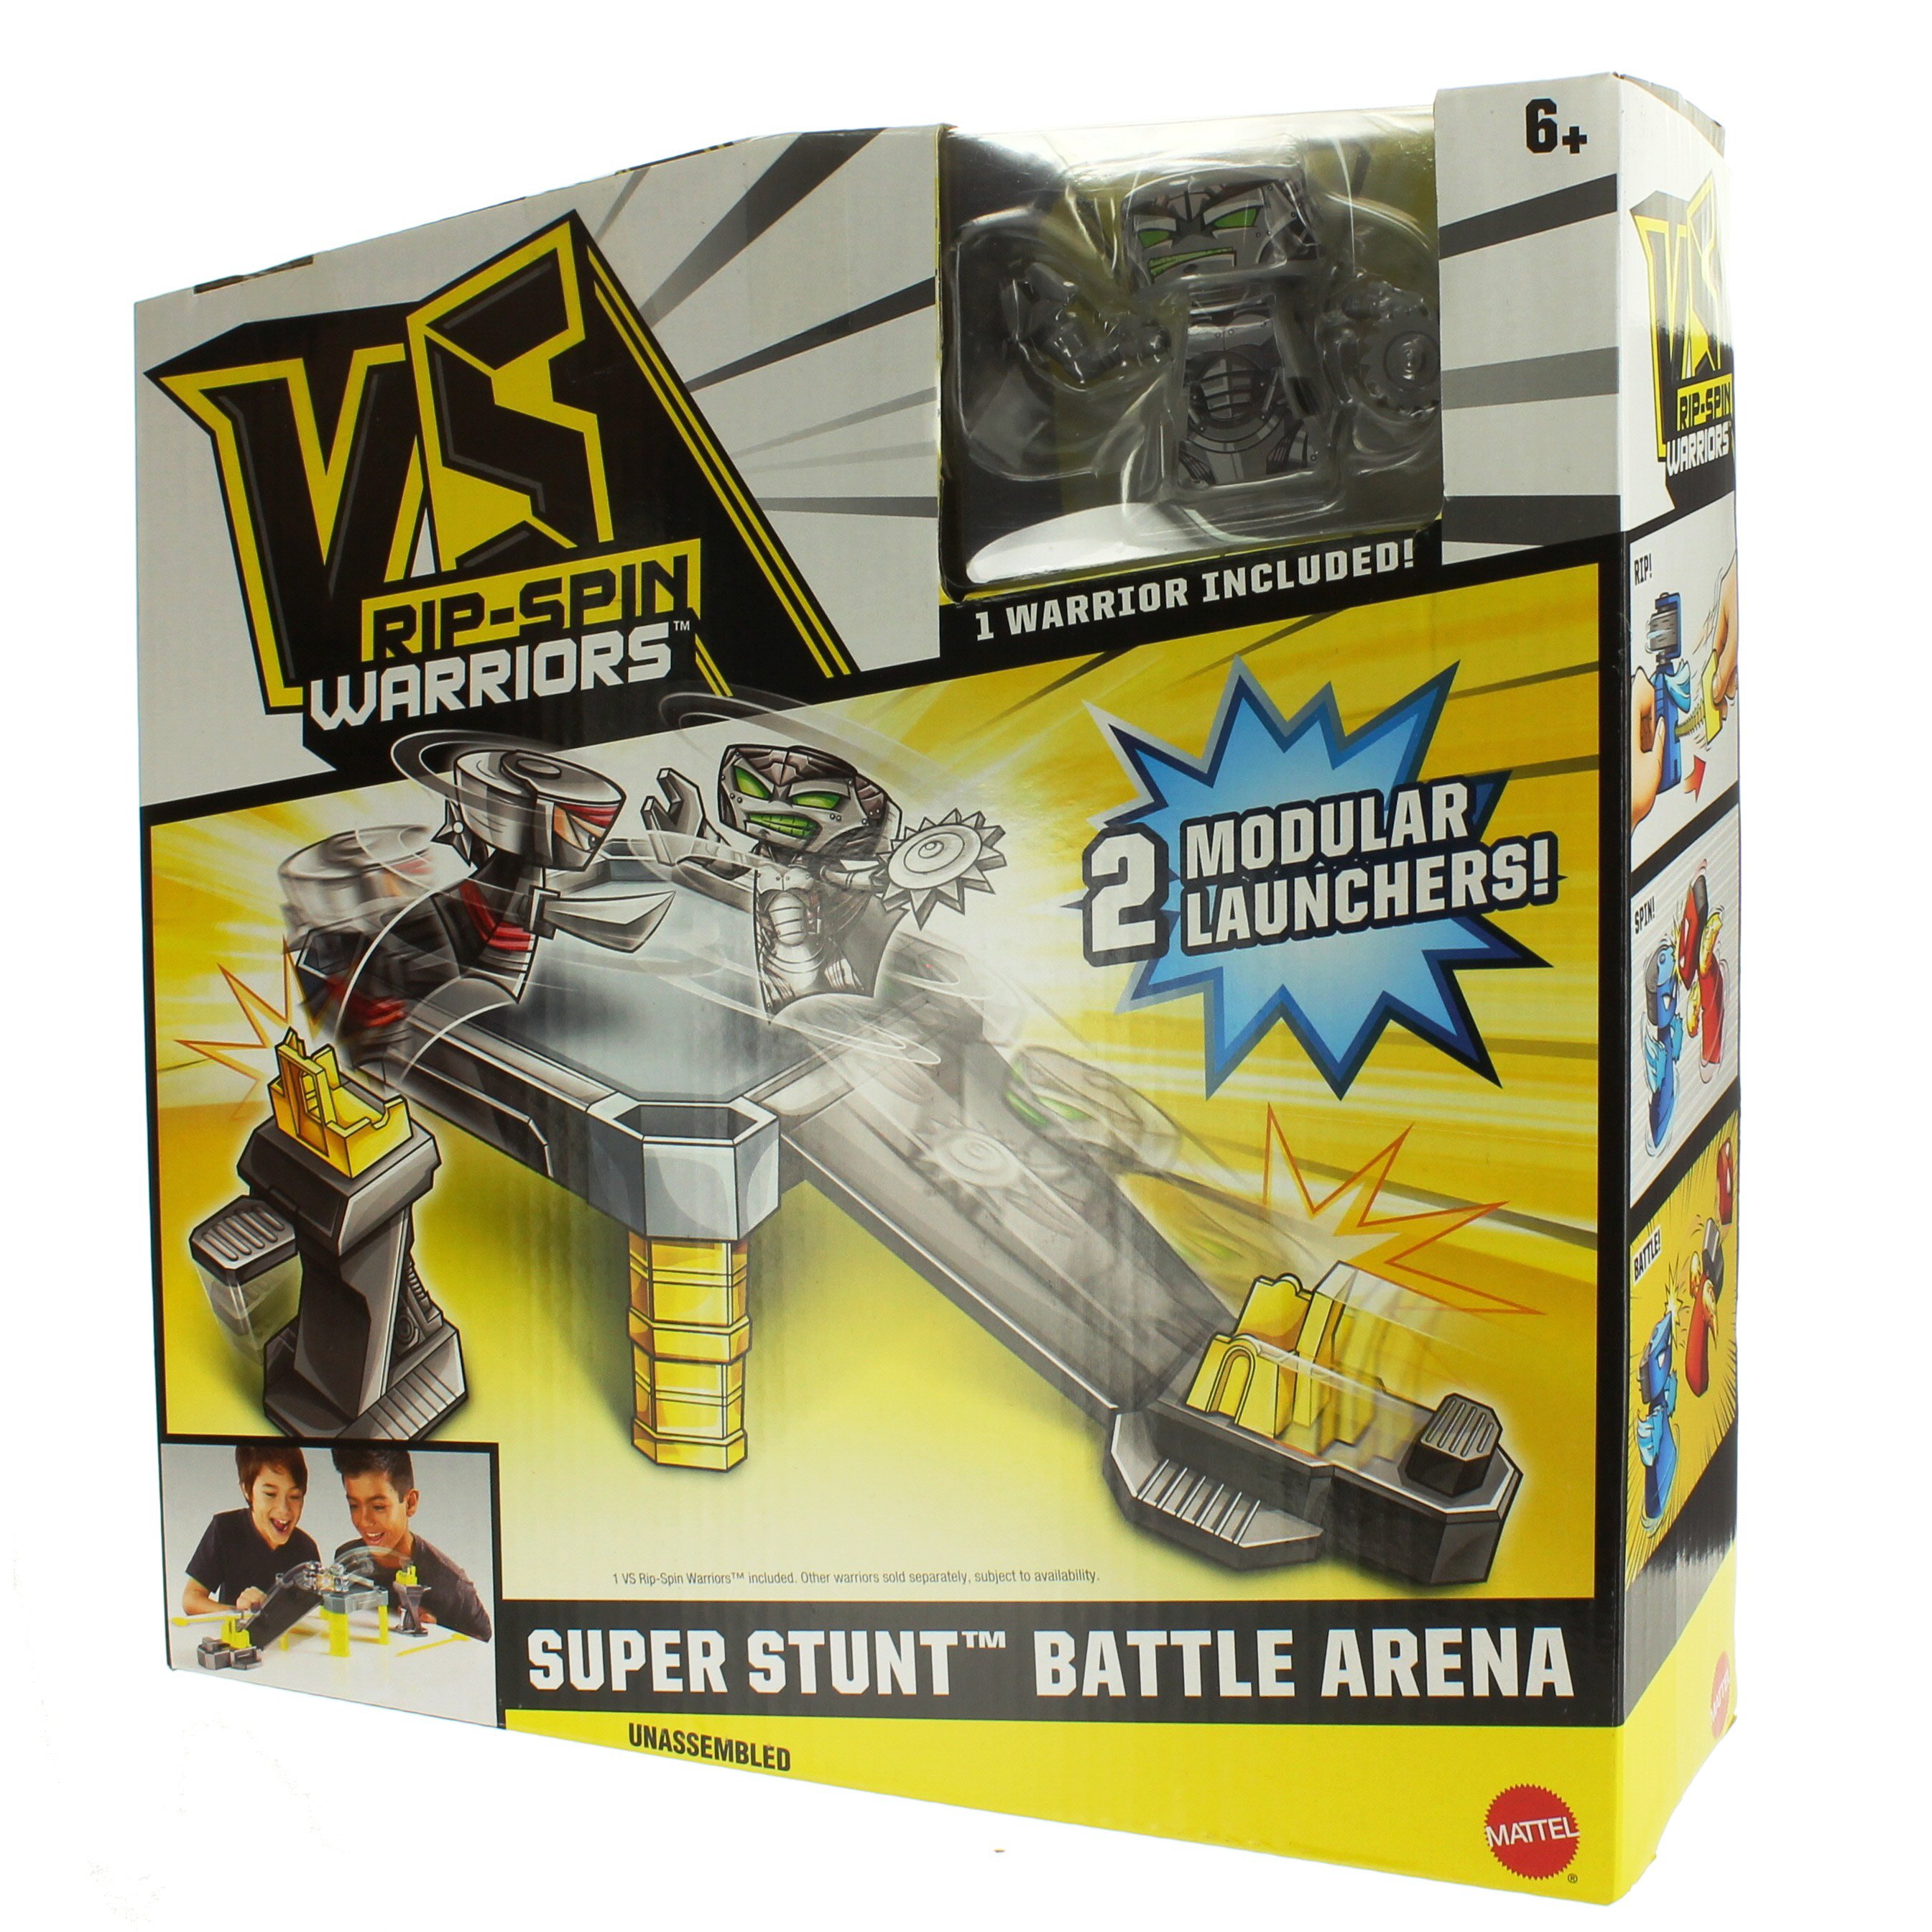 VS Rip-spin Warriors Slam Down Battle Arena Toy J2 for sale online 